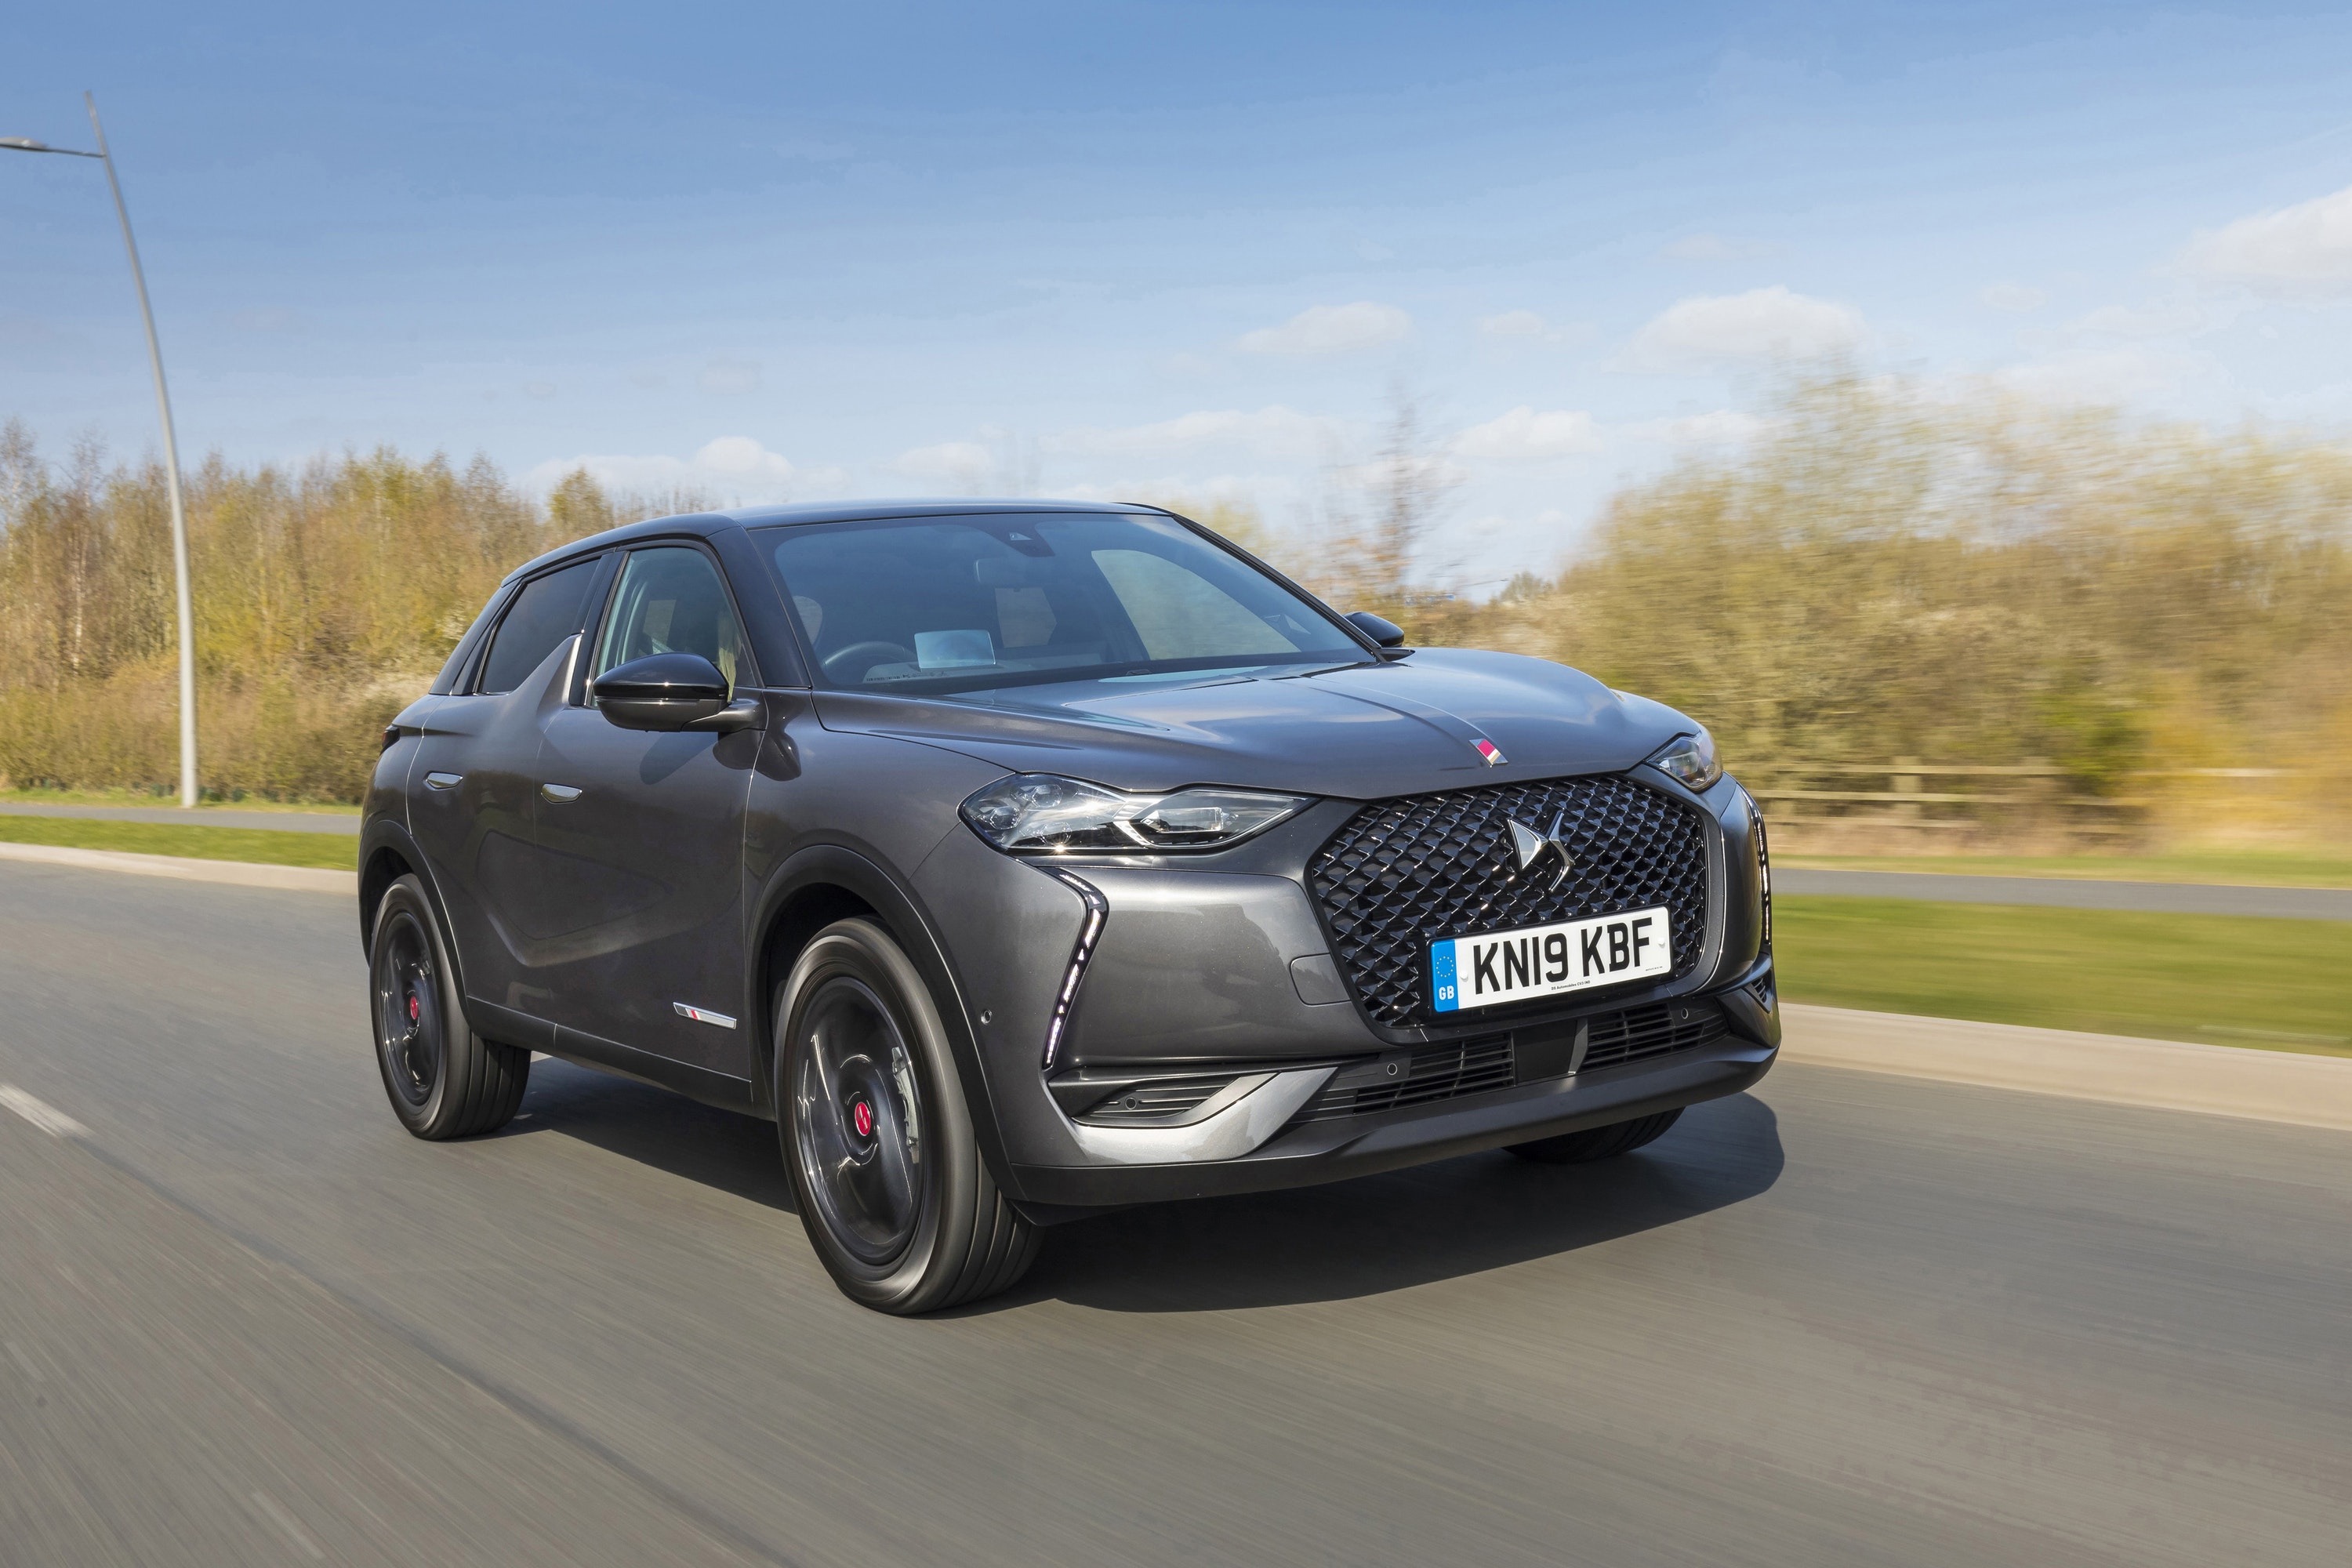 Front view of the DS3 Crossback driving on a road.jpg